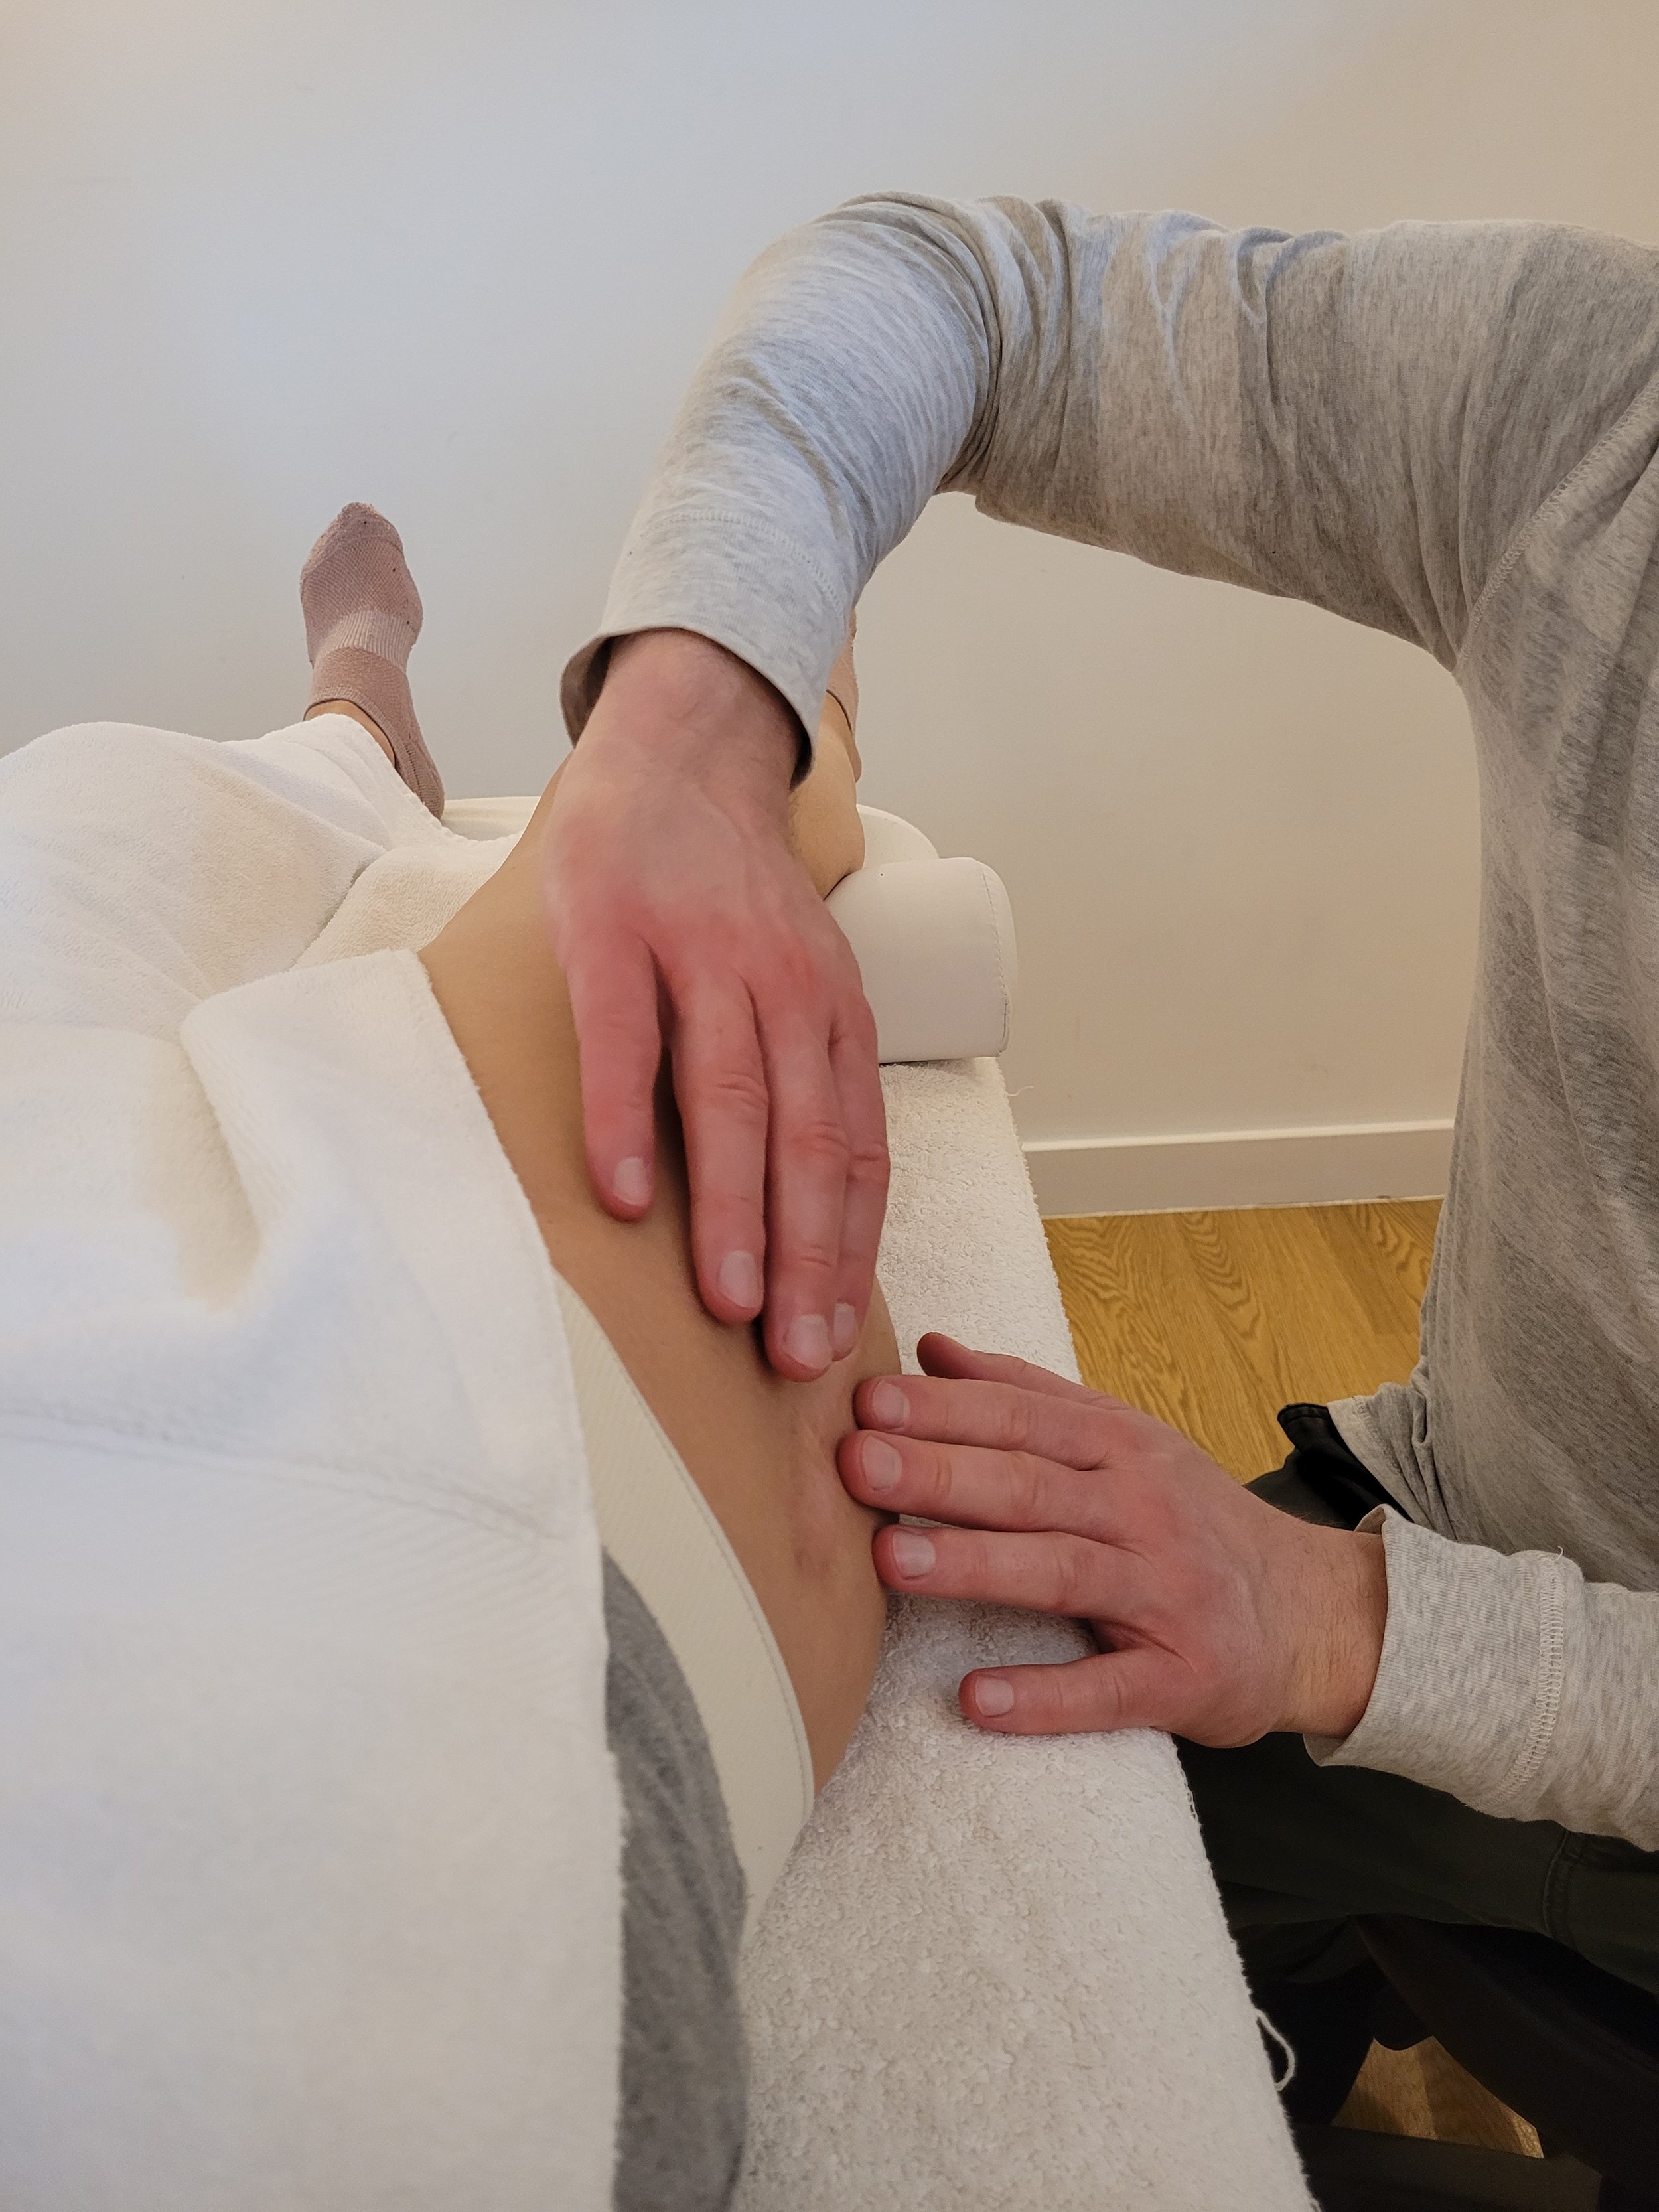 scar healing with cranial osteopath shaun hoult at fix east village